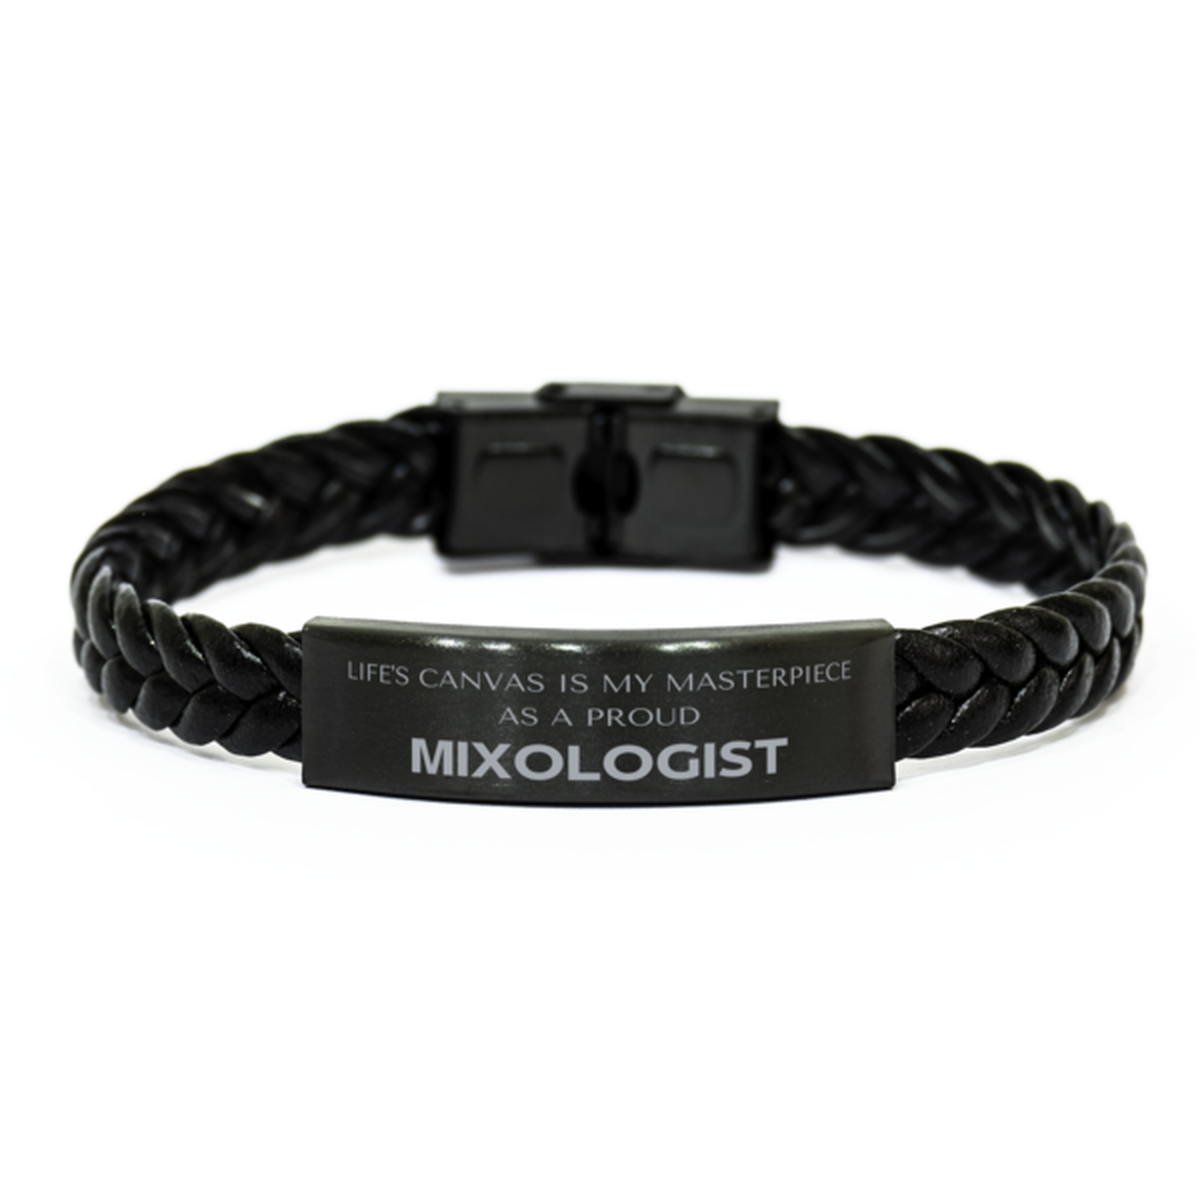 Proud Mixologist Gifts, Life's canvas is my masterpiece, Epic Birthday Christmas Unique Braided Leather Bracelet For Mixologist, Coworkers, Men, Women, Friends